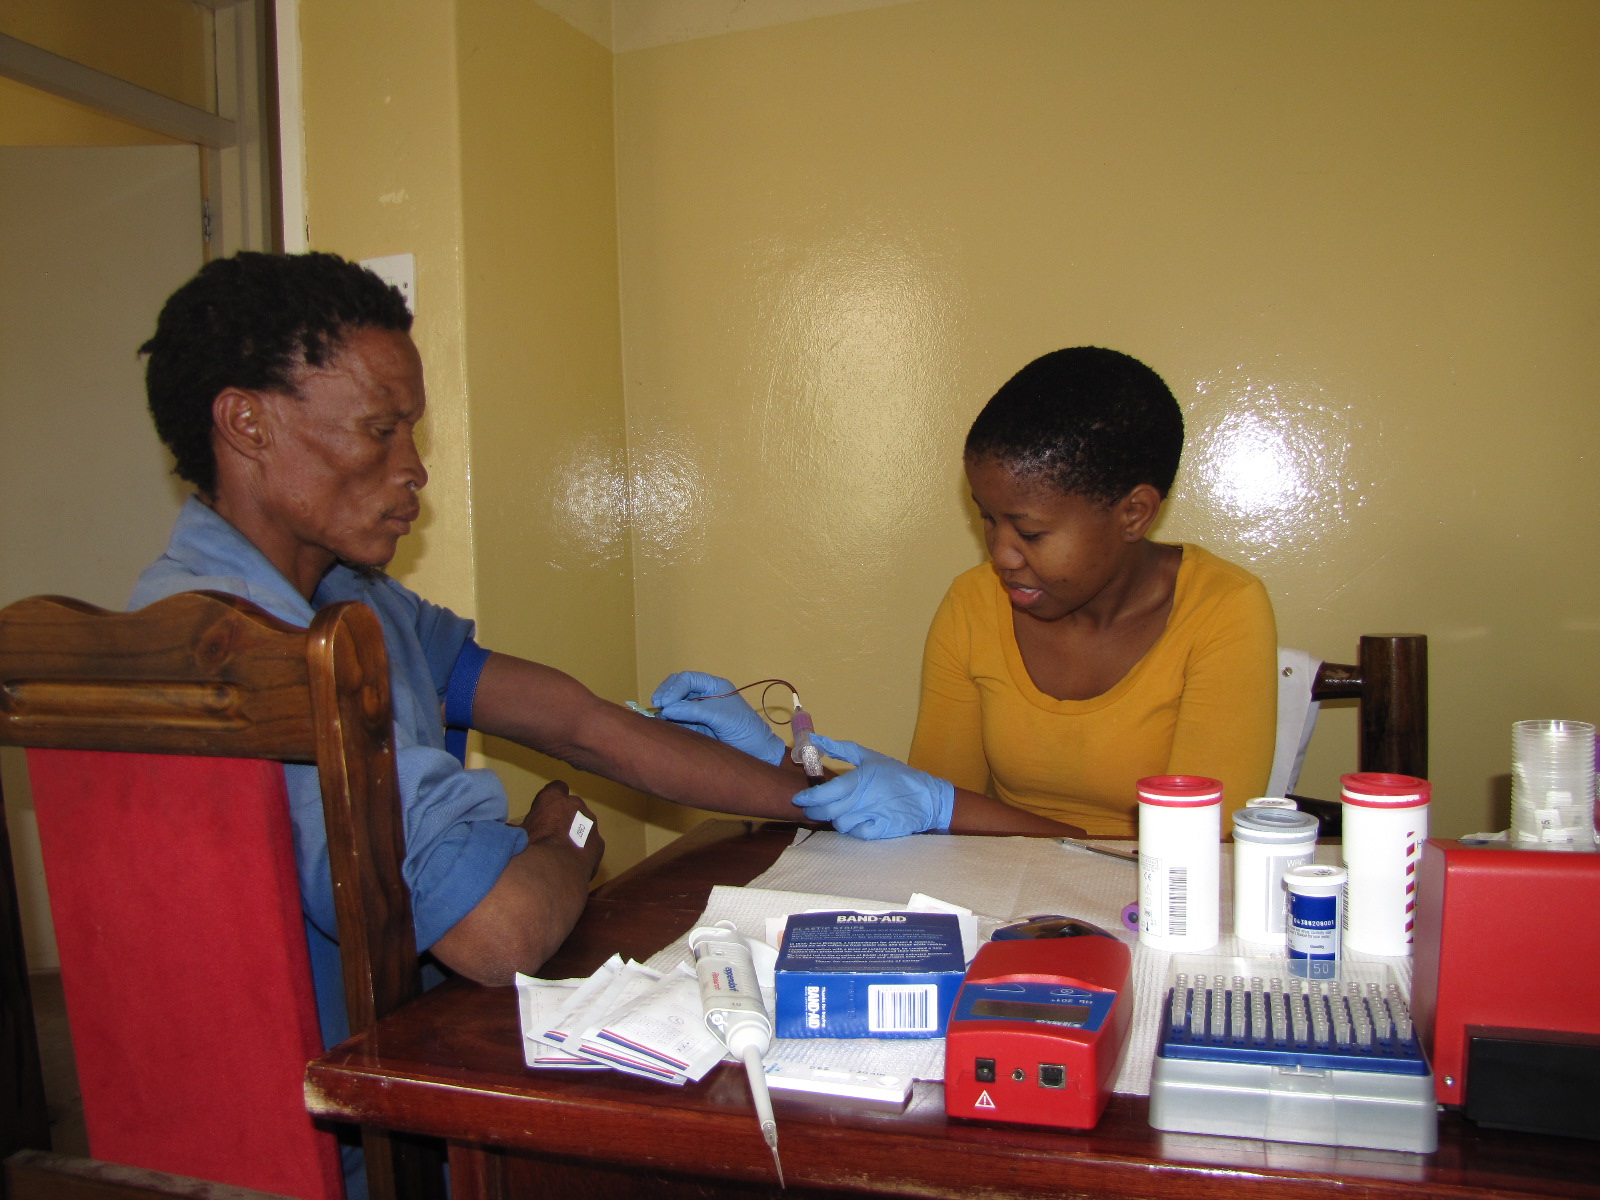 Researcher draws blood sample from participant.